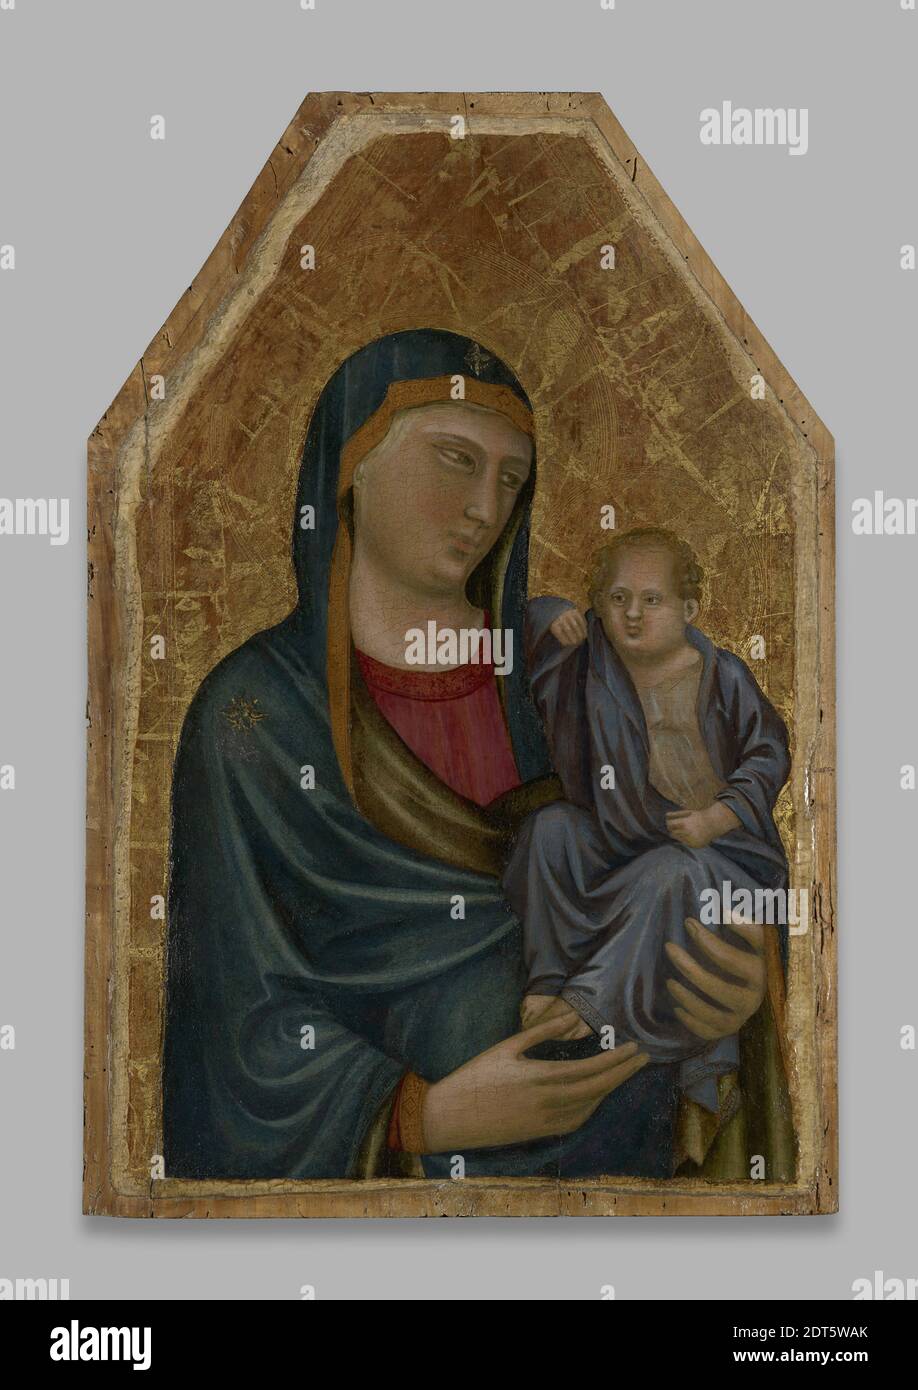 Artist: Master of the Horne Triptych, Italian, Florence, active early 14th century, Virgin and Child, ca. 1325, Egg tempera on panel, 79.1 × 52.5 cm (31 1/8 × 20 11/16 in.), Made in Florence, Italy, Italian, Florence, 14th century, Paintings Stock Photo